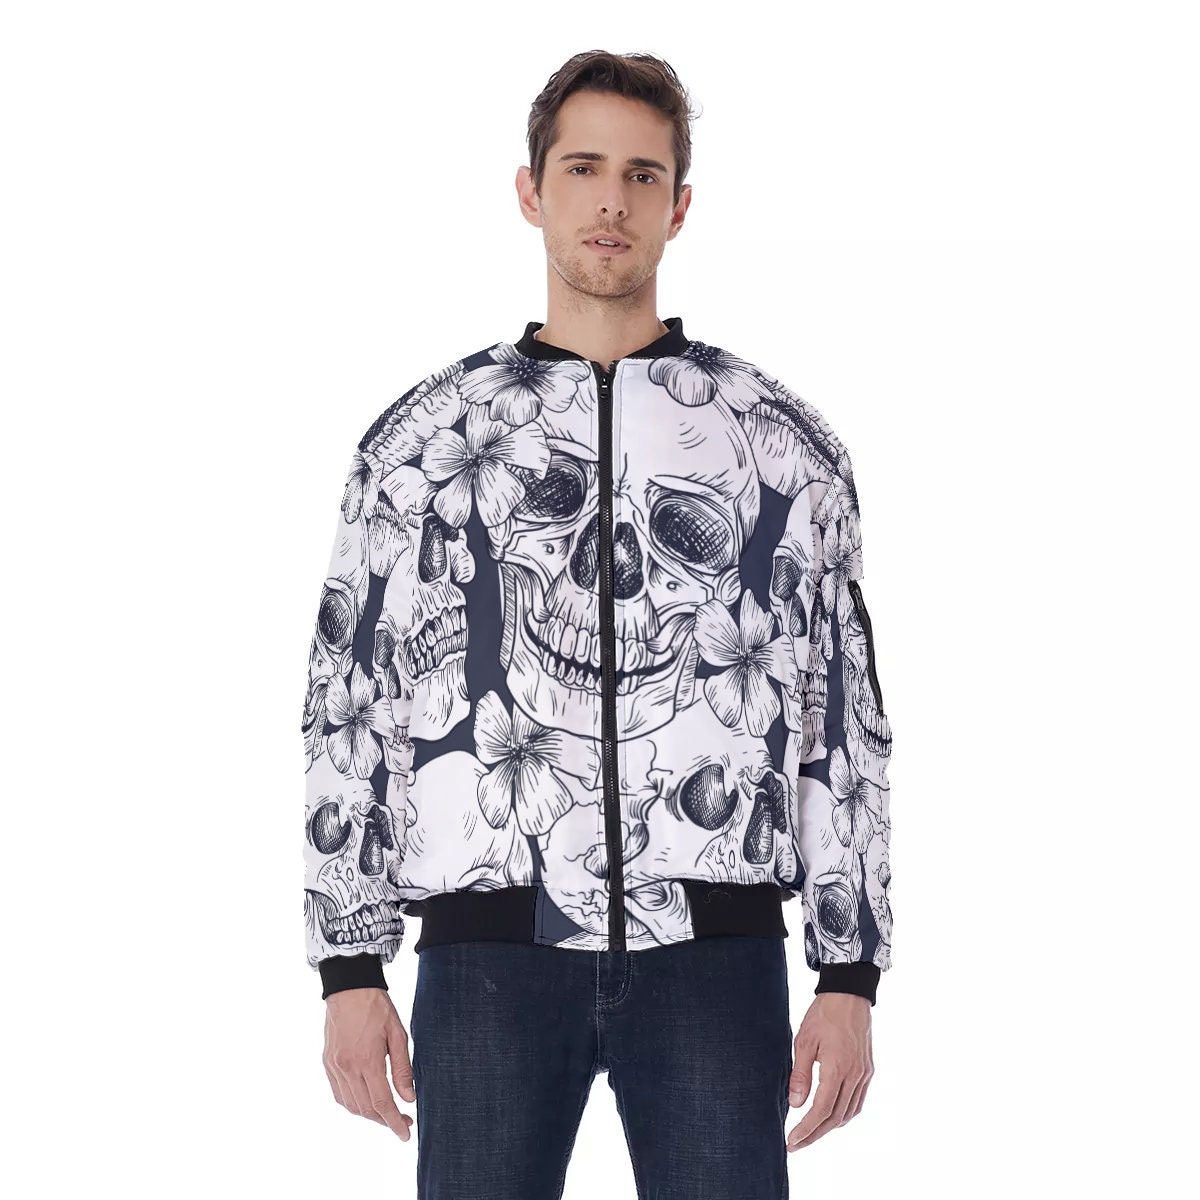 Discover Skulls And Roses Bomber Jacket